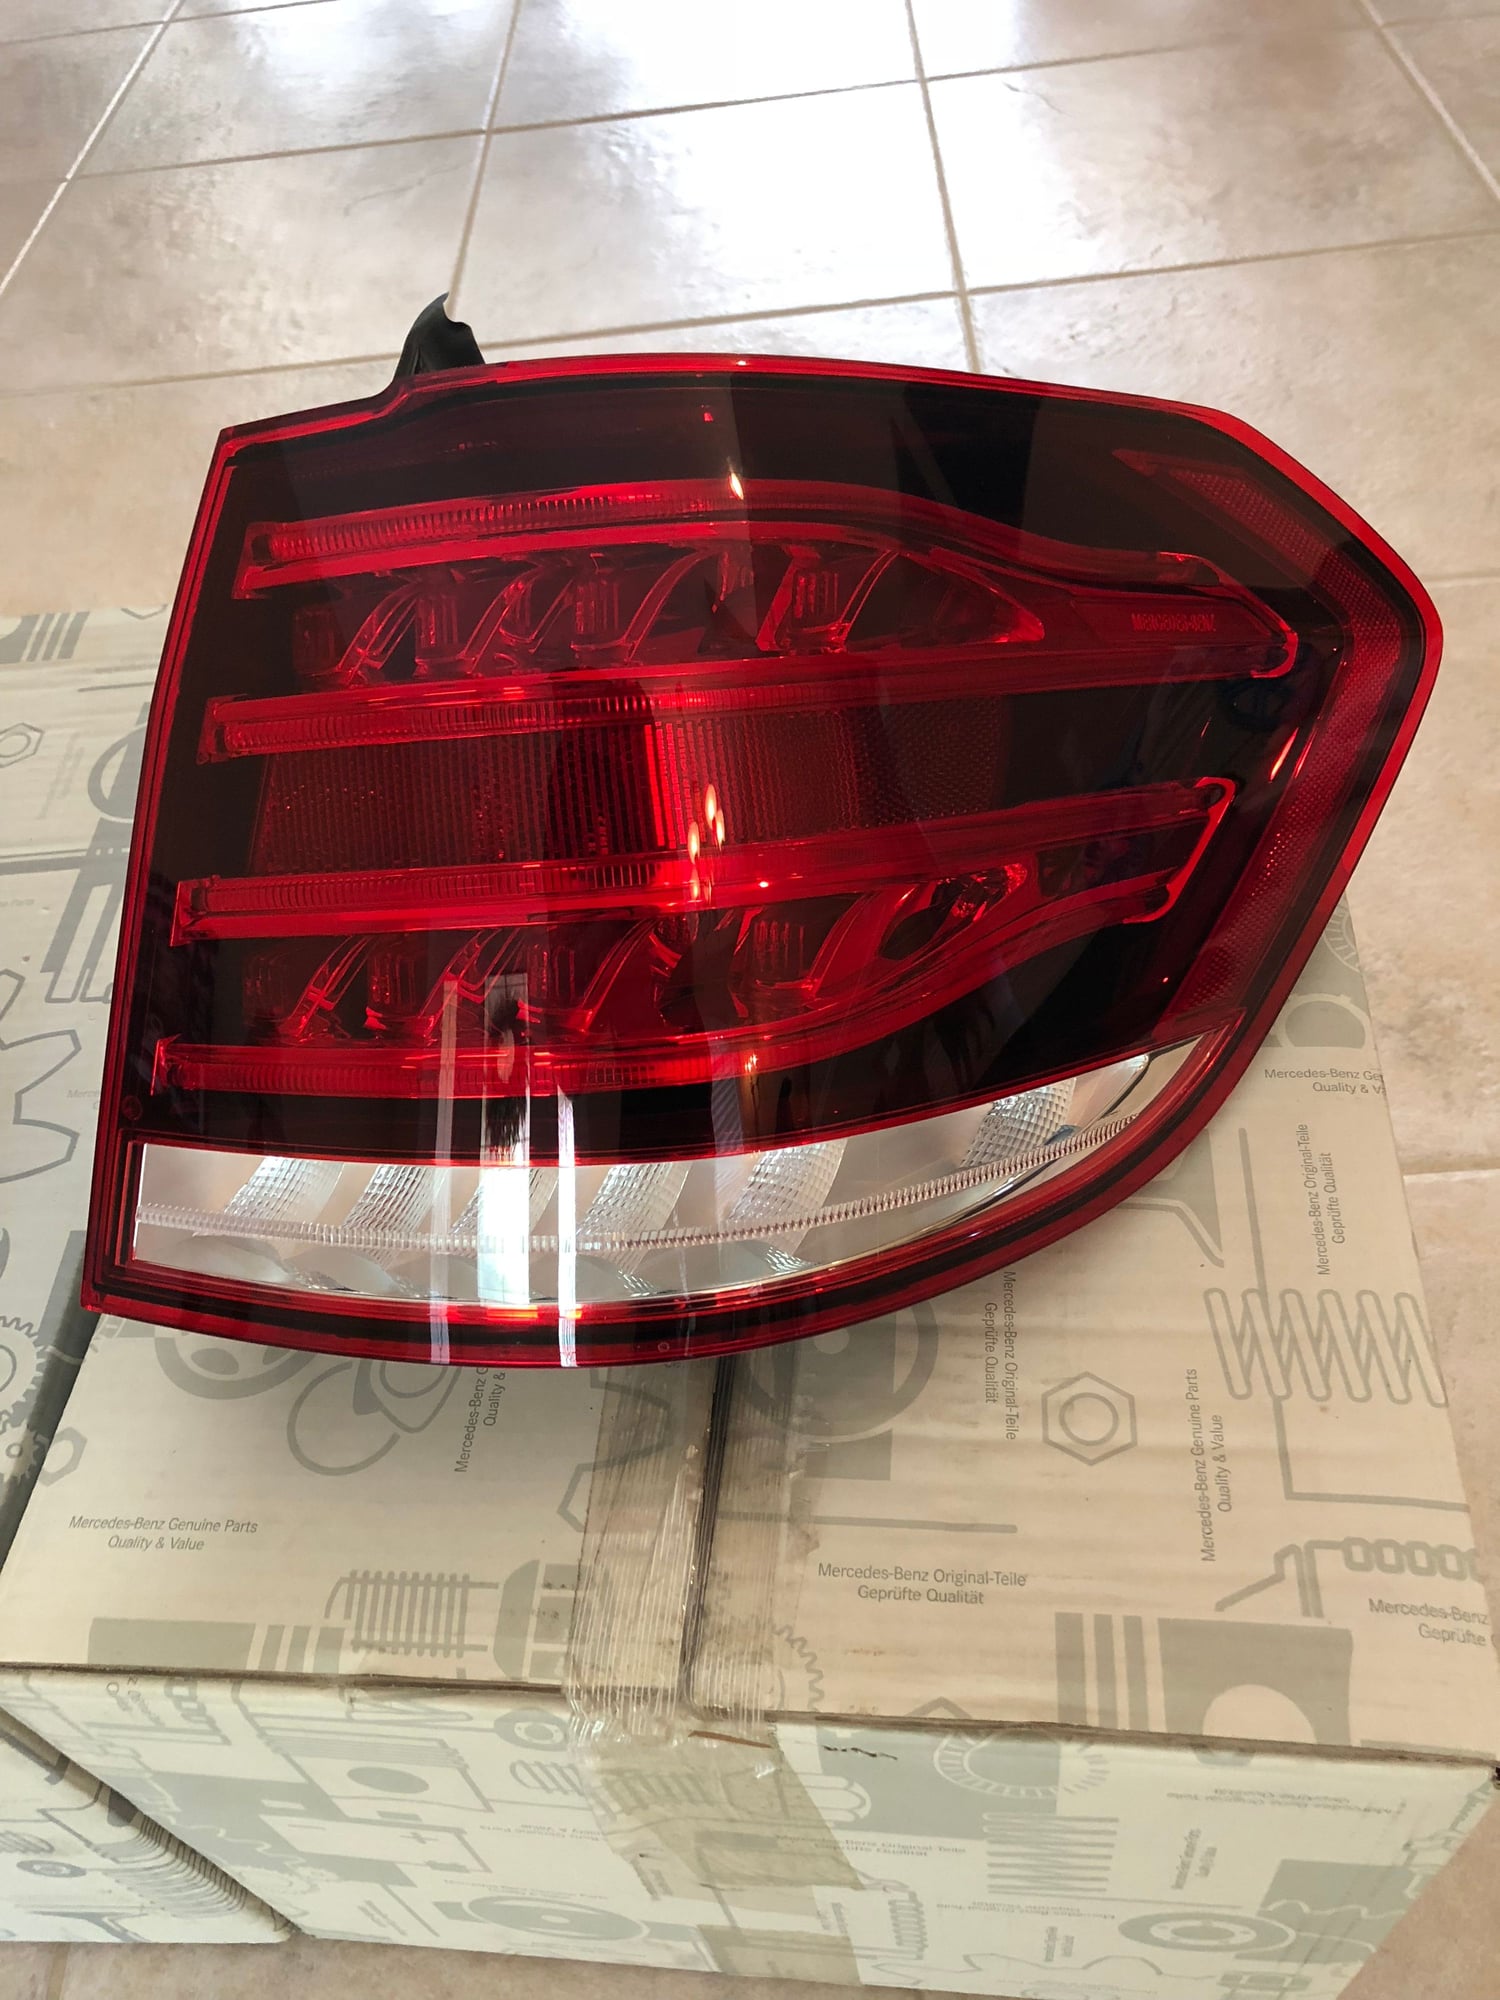 Lights - OEM EURO Spec E Class Tail Lights 2014-16 NIB FIRE SALE - New - 2014 to 2016 Mercedes-Benz E63 AMG S - 2014 to 2016 Mercedes-Benz E300 - Collierville, TN 38017, United States